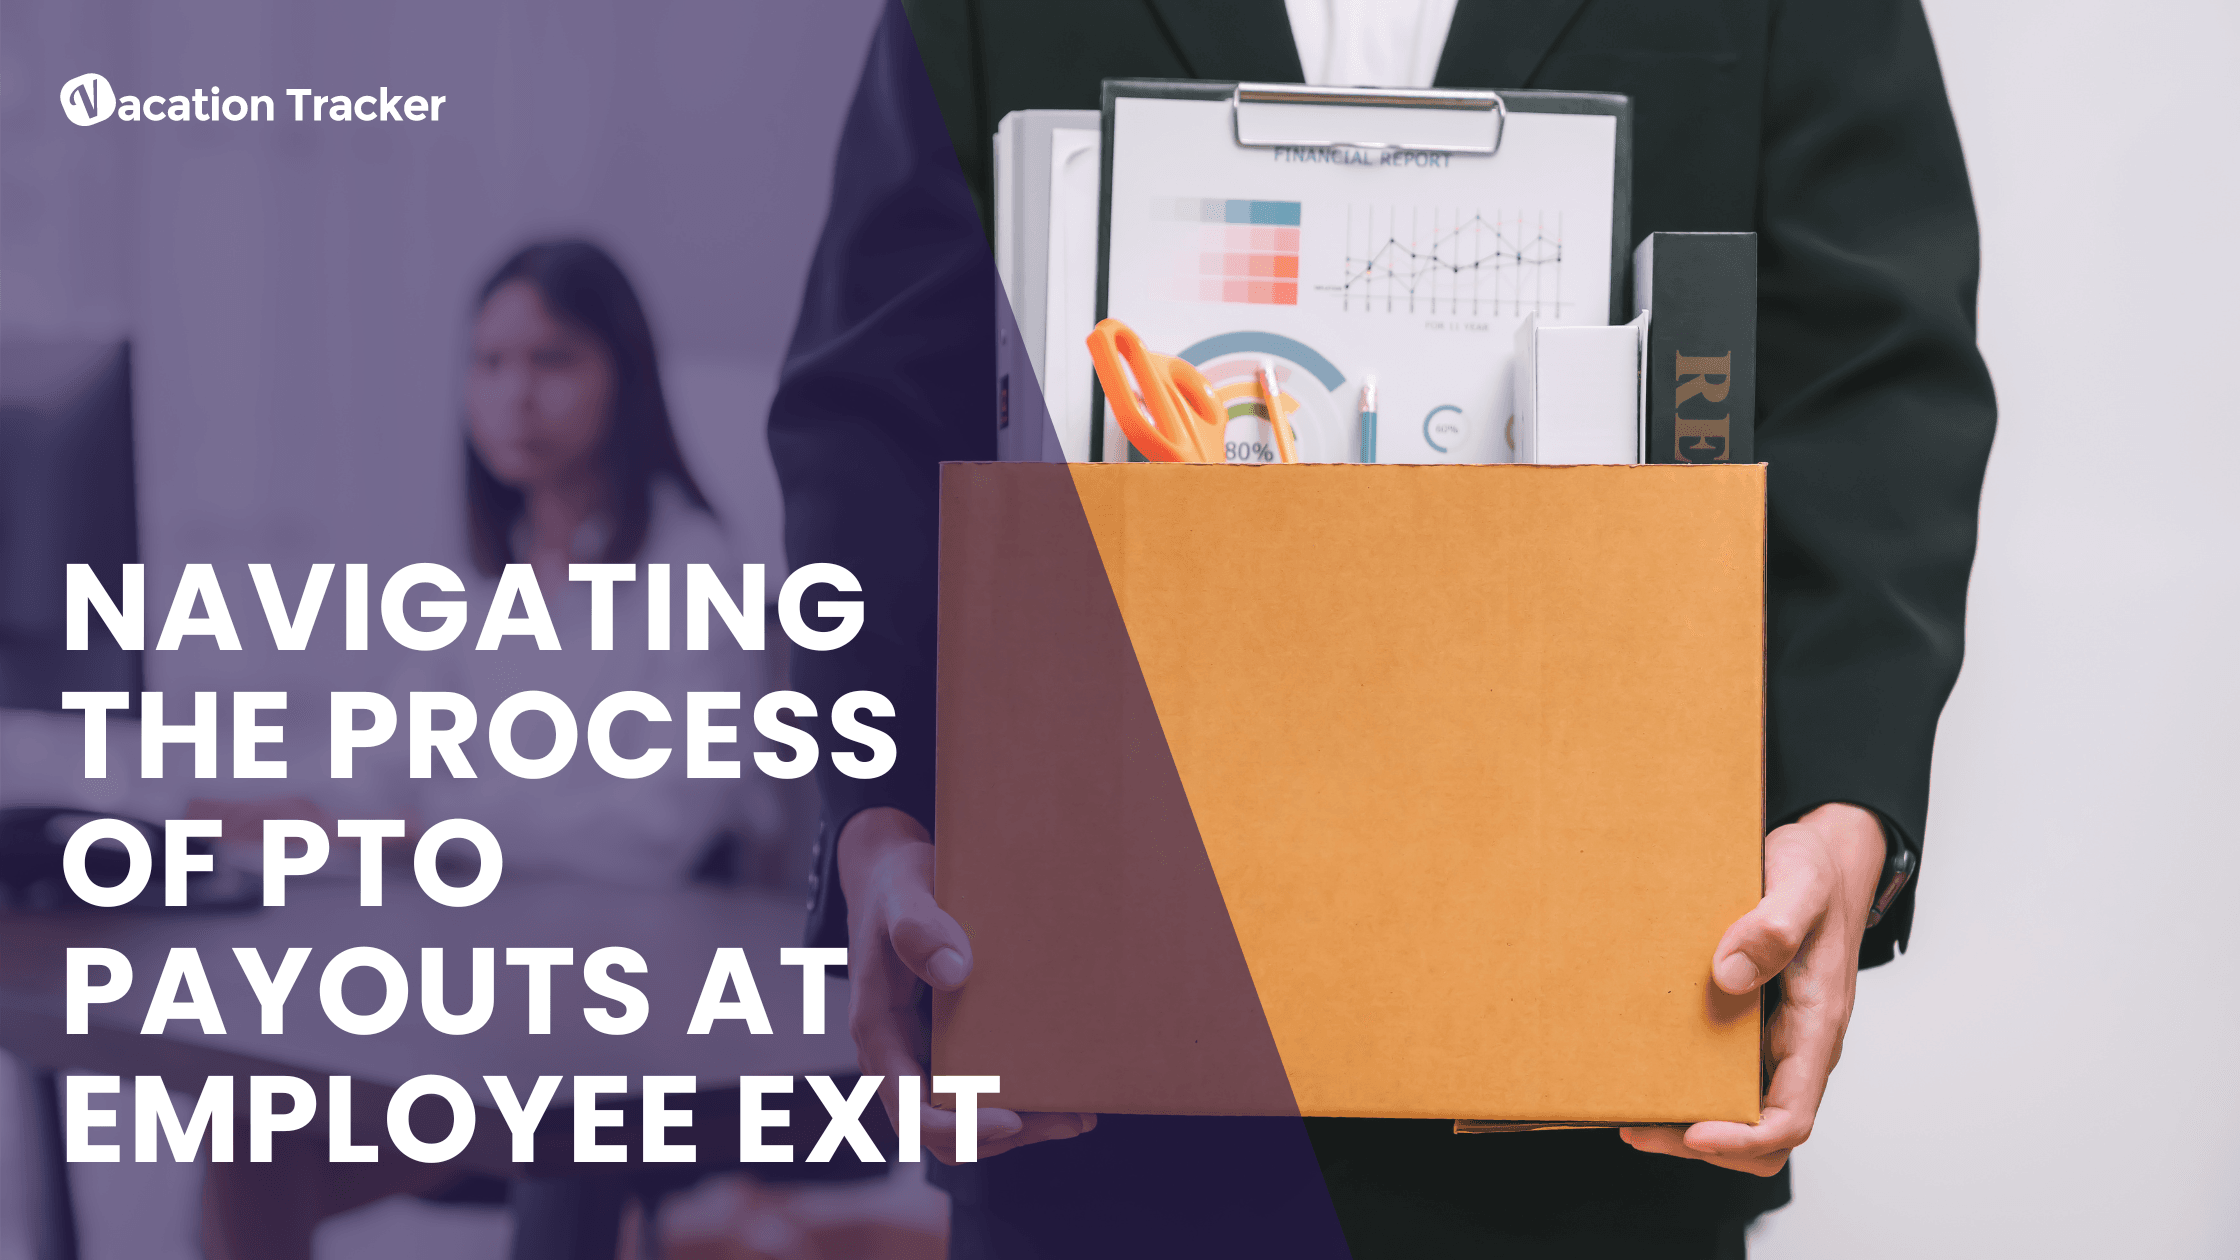 Navigating the Process of PTO Payouts at Employee Exit